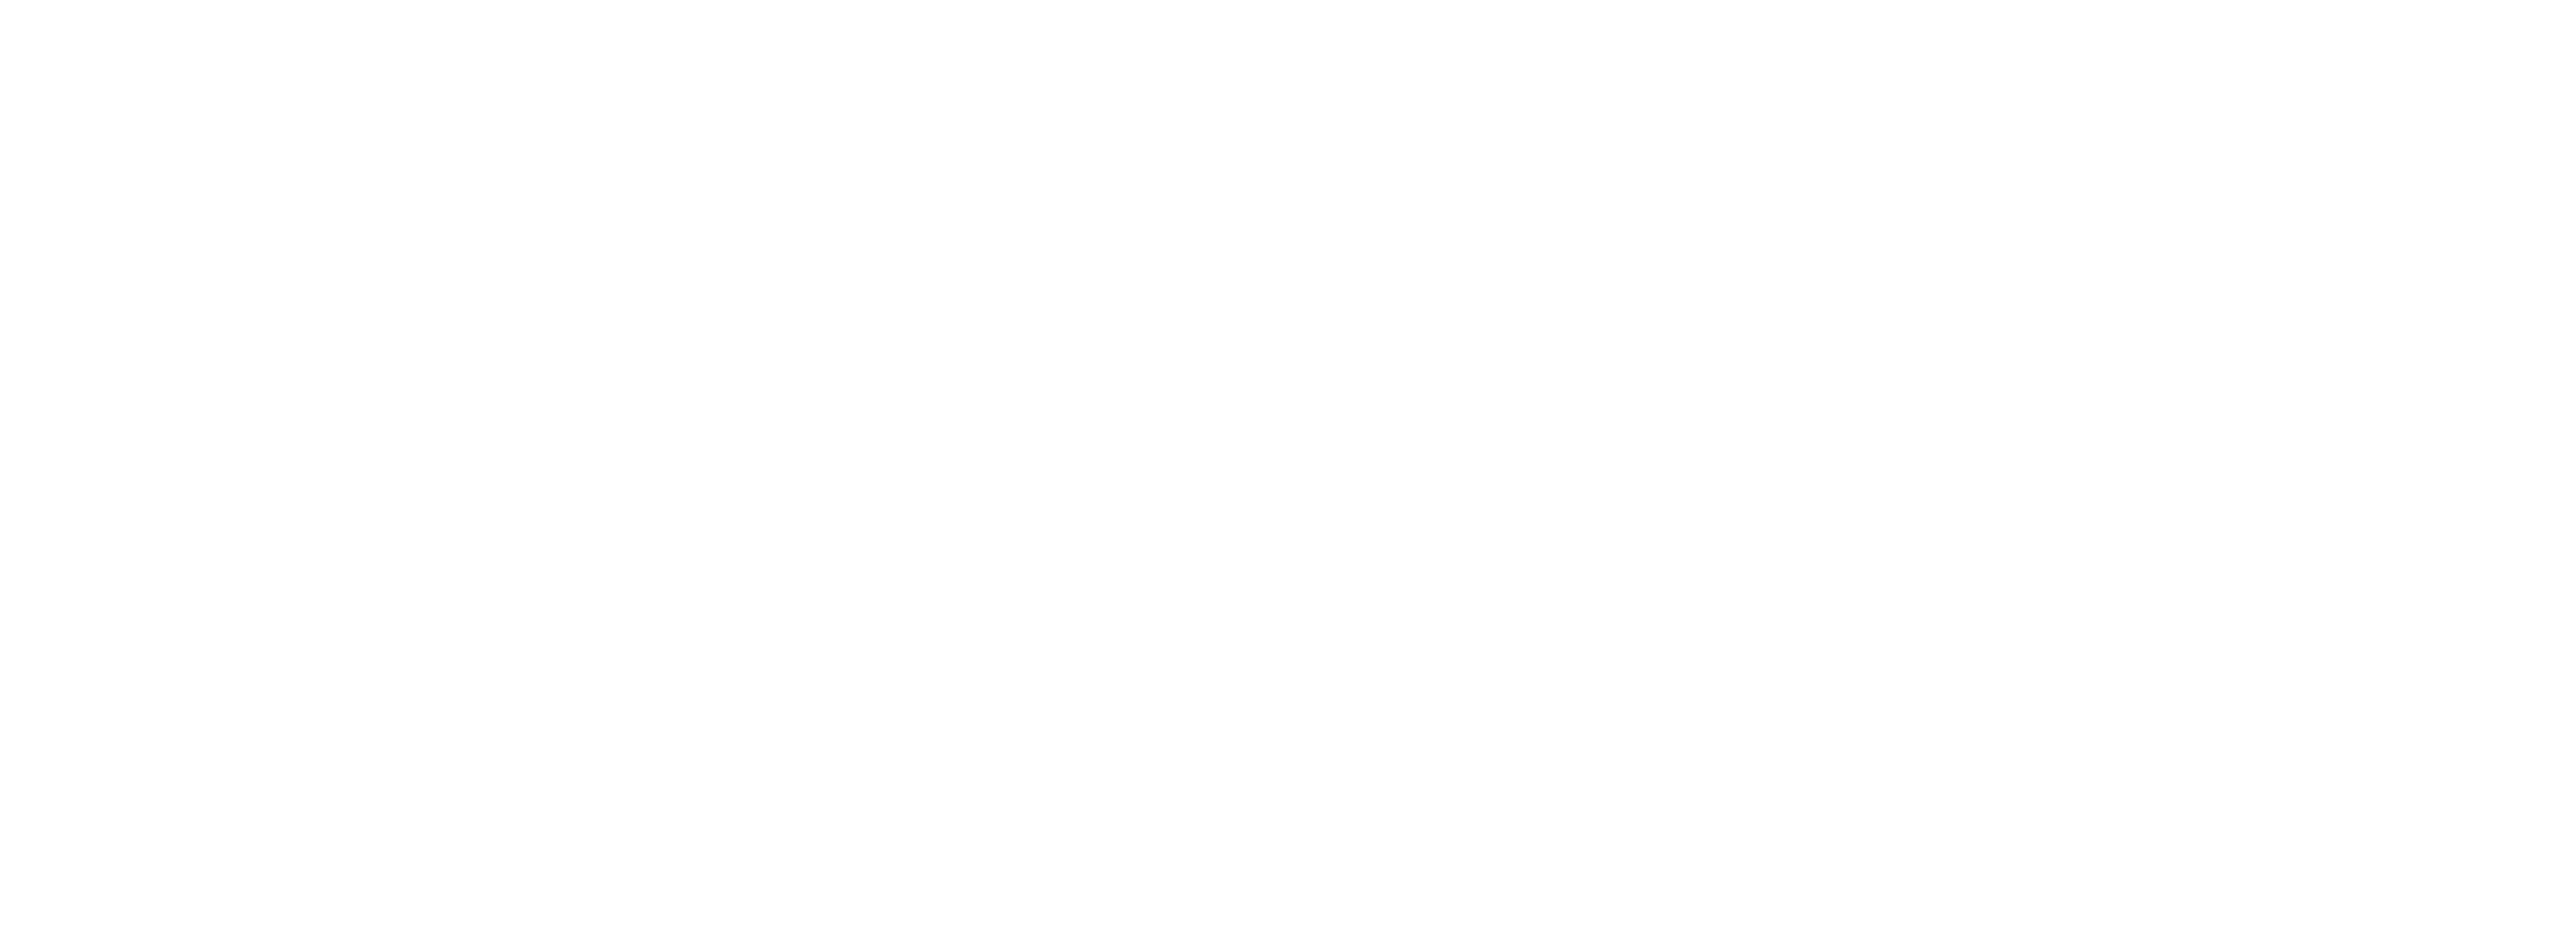 ANTHONY ARENDT / DIRECTOR OF PHOTOGRAPHY